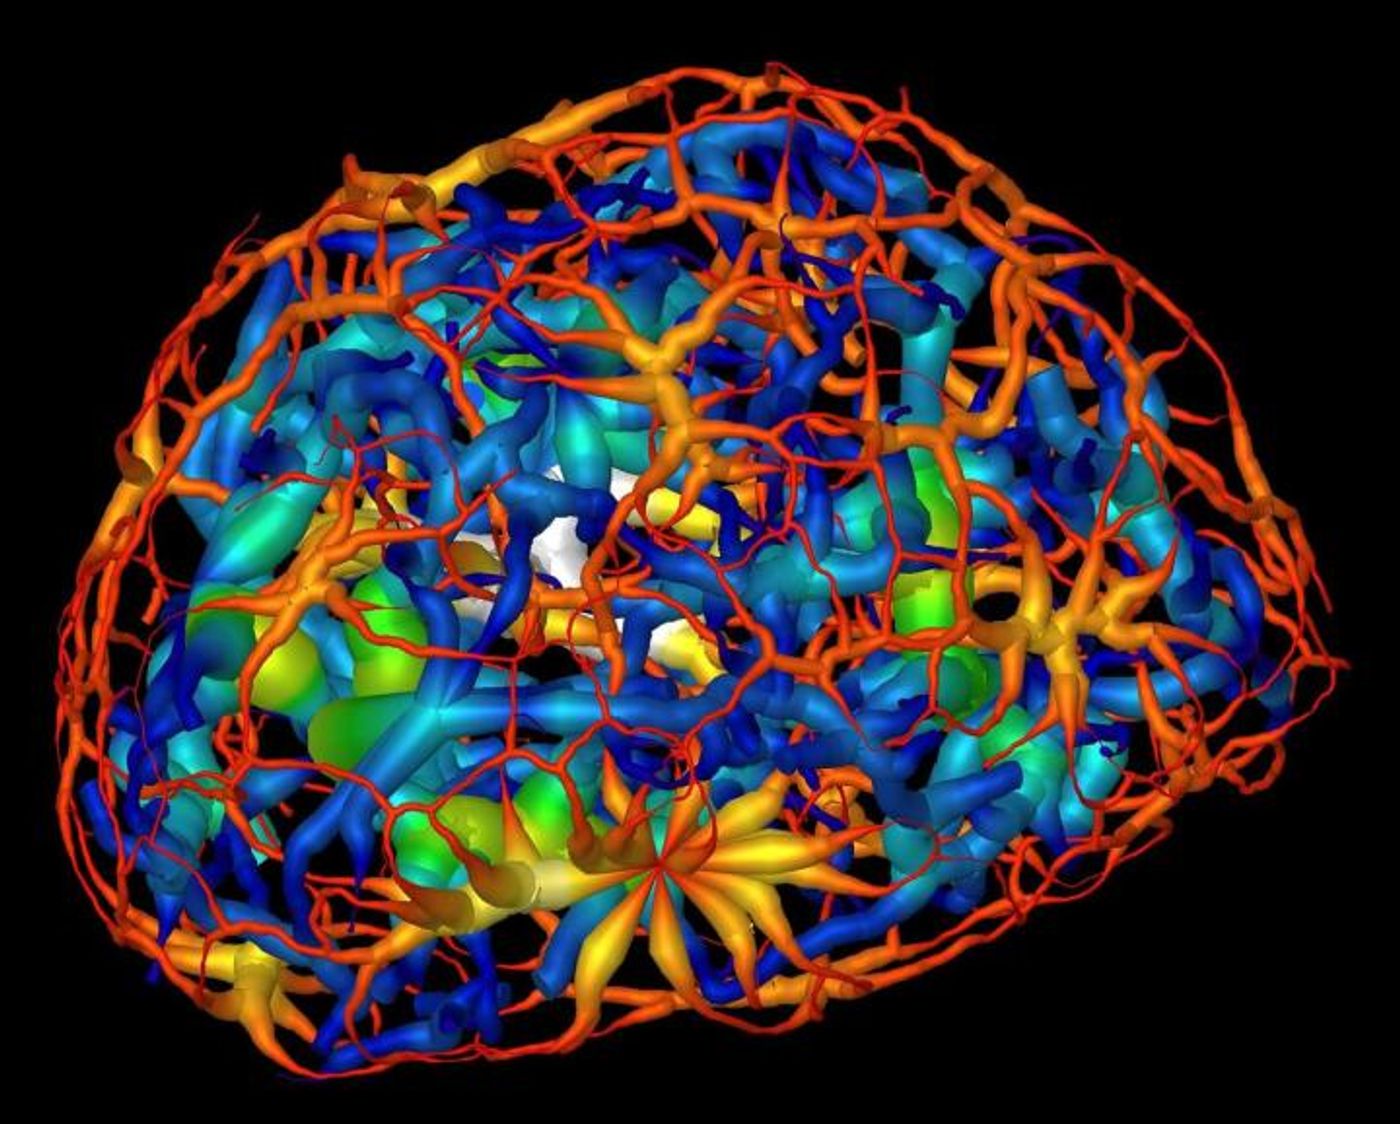 This computer rendering shows the skeletonized structure of heterochromatin (red represents a thin region while white represents a thick region), a tightly packed form of DNA, surrounding another form of DNA-carrying material known as euchromatin (dark blue represents a thin region and yellow represent the thickest) in a mouse's mature nerve cell. / Credit: Berkeley Lab, UCSF